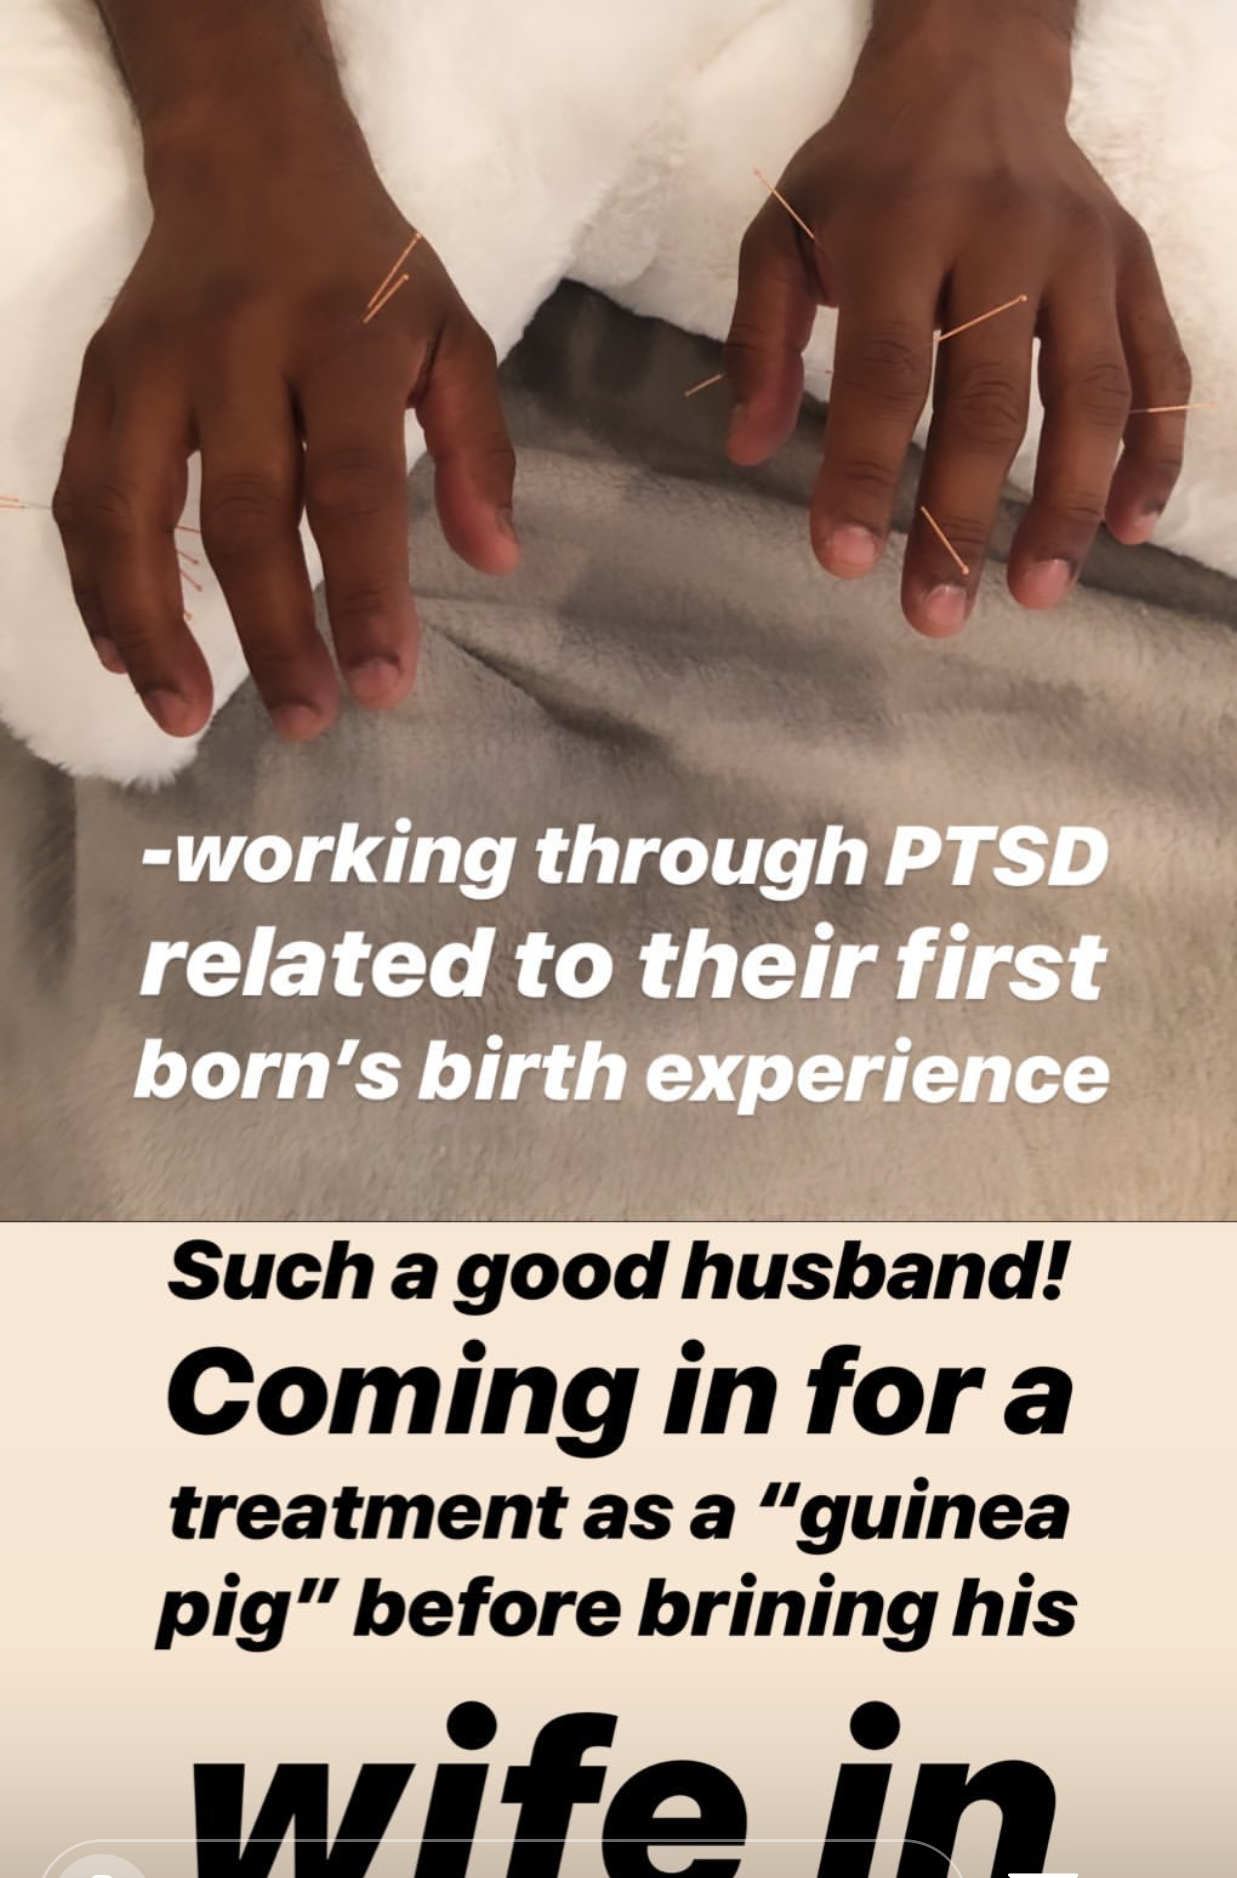  SuJok acupuncture treatment used as couples therapy to work through Post Traumatic Stress Disorder (PTSD) triggered by important life events such as the birth of a child.  